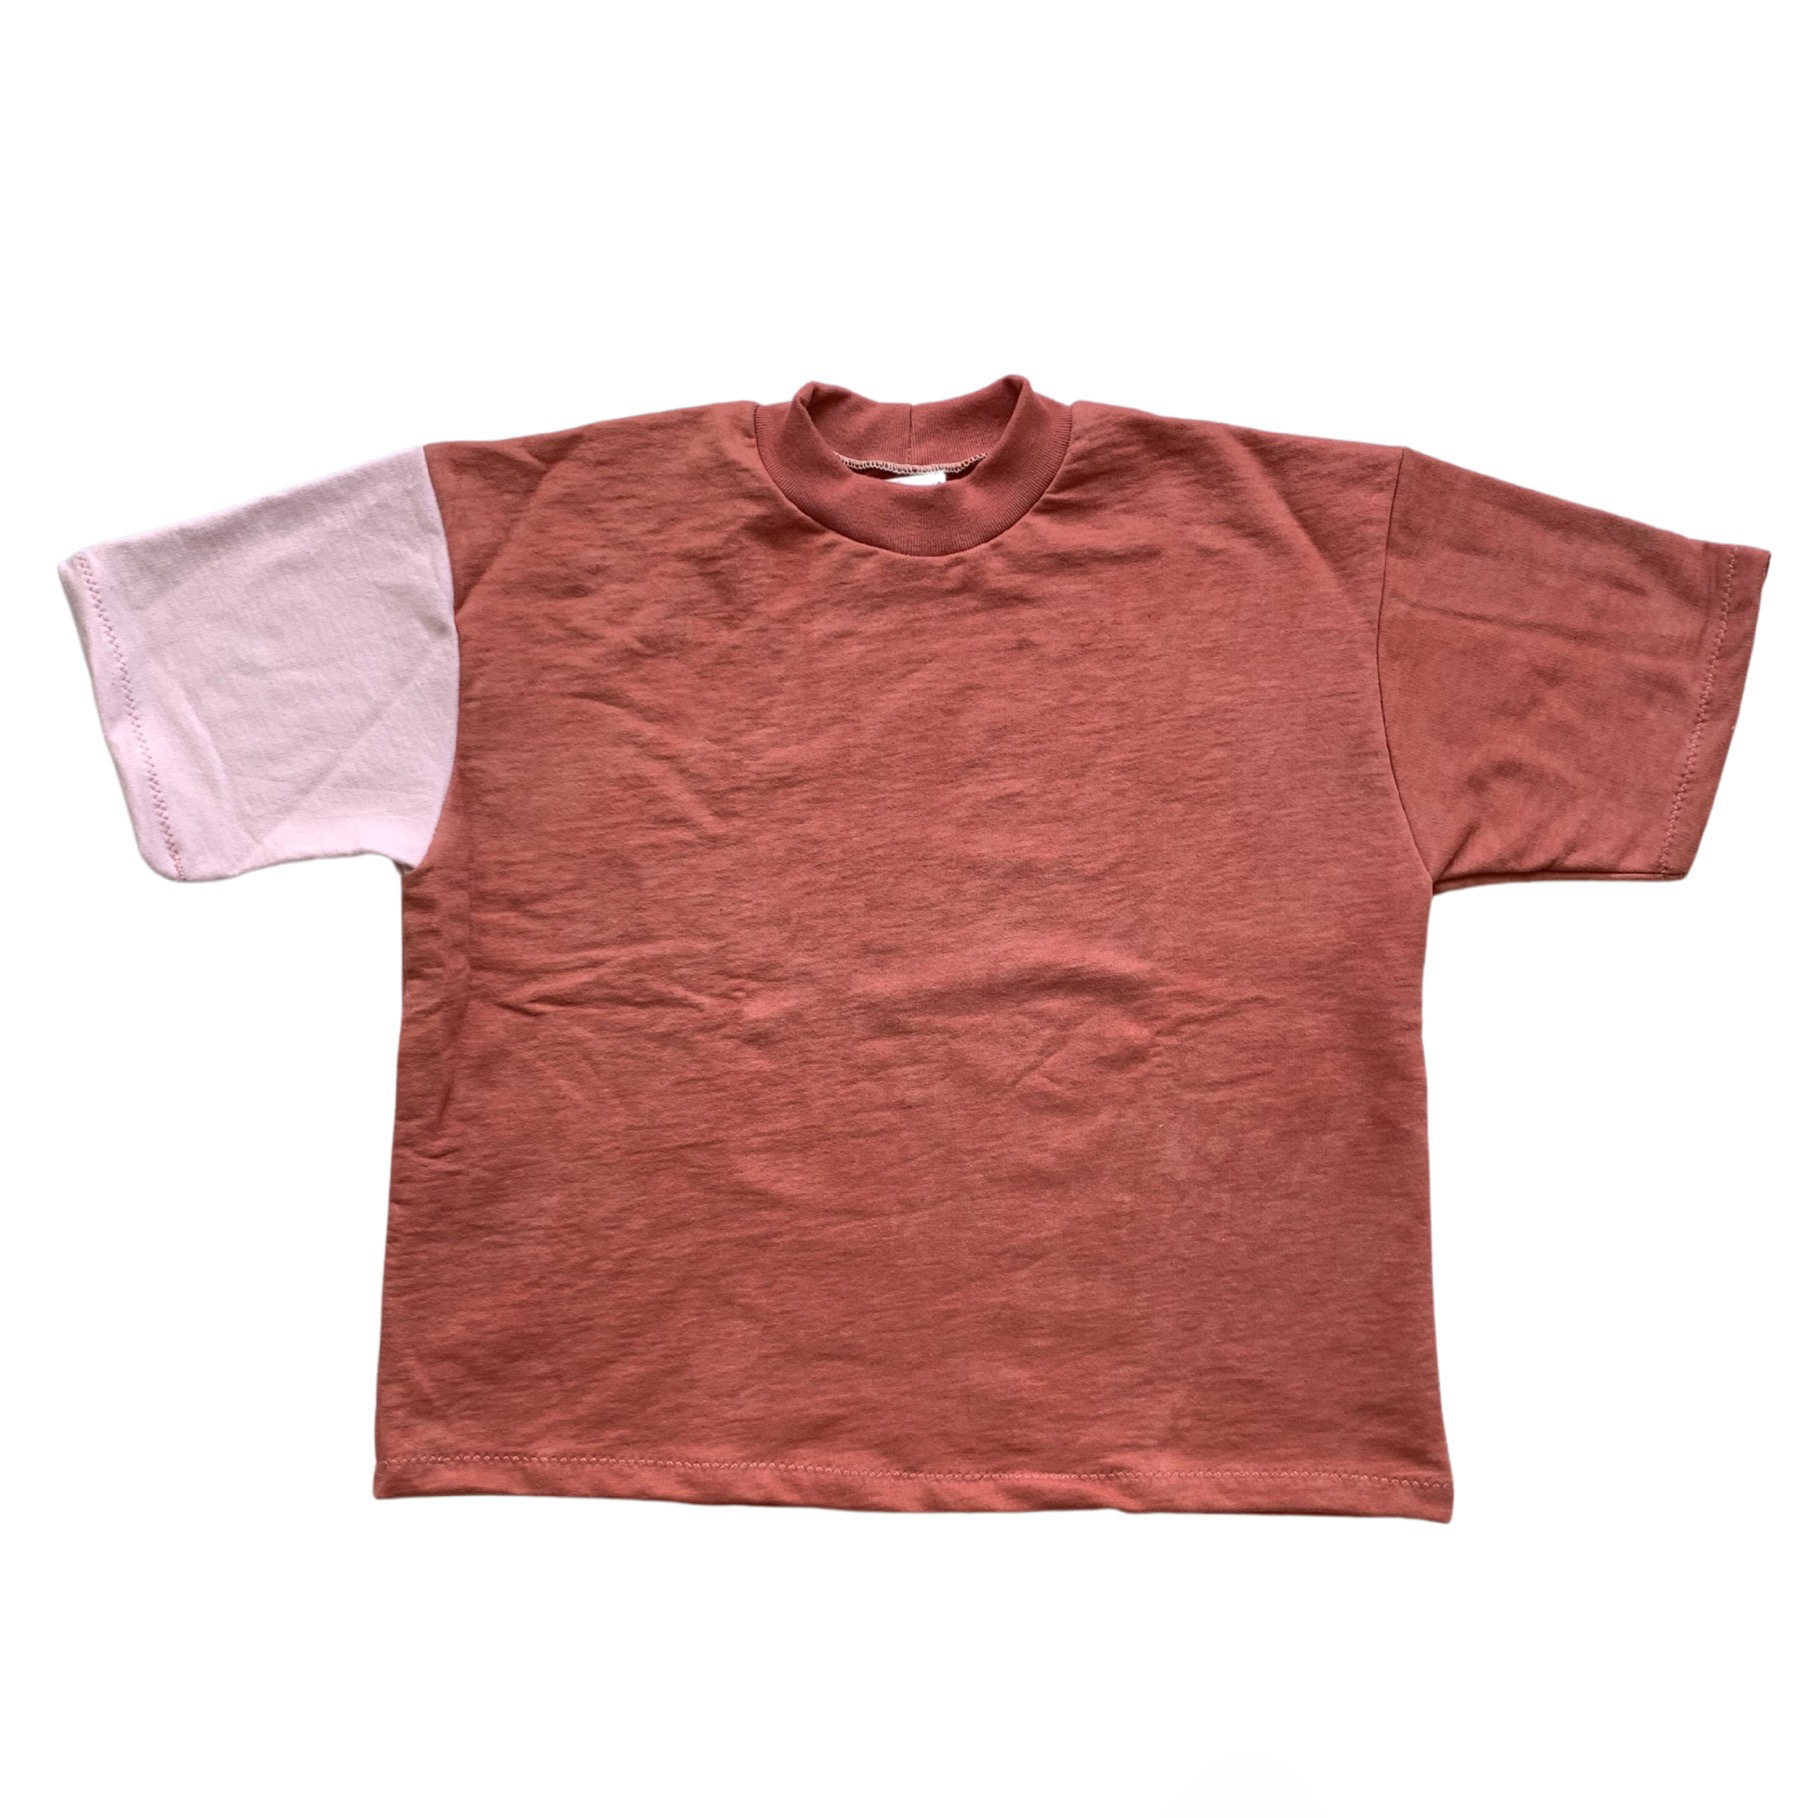 french terry heavy tee - organic usa cotton - L SHORT